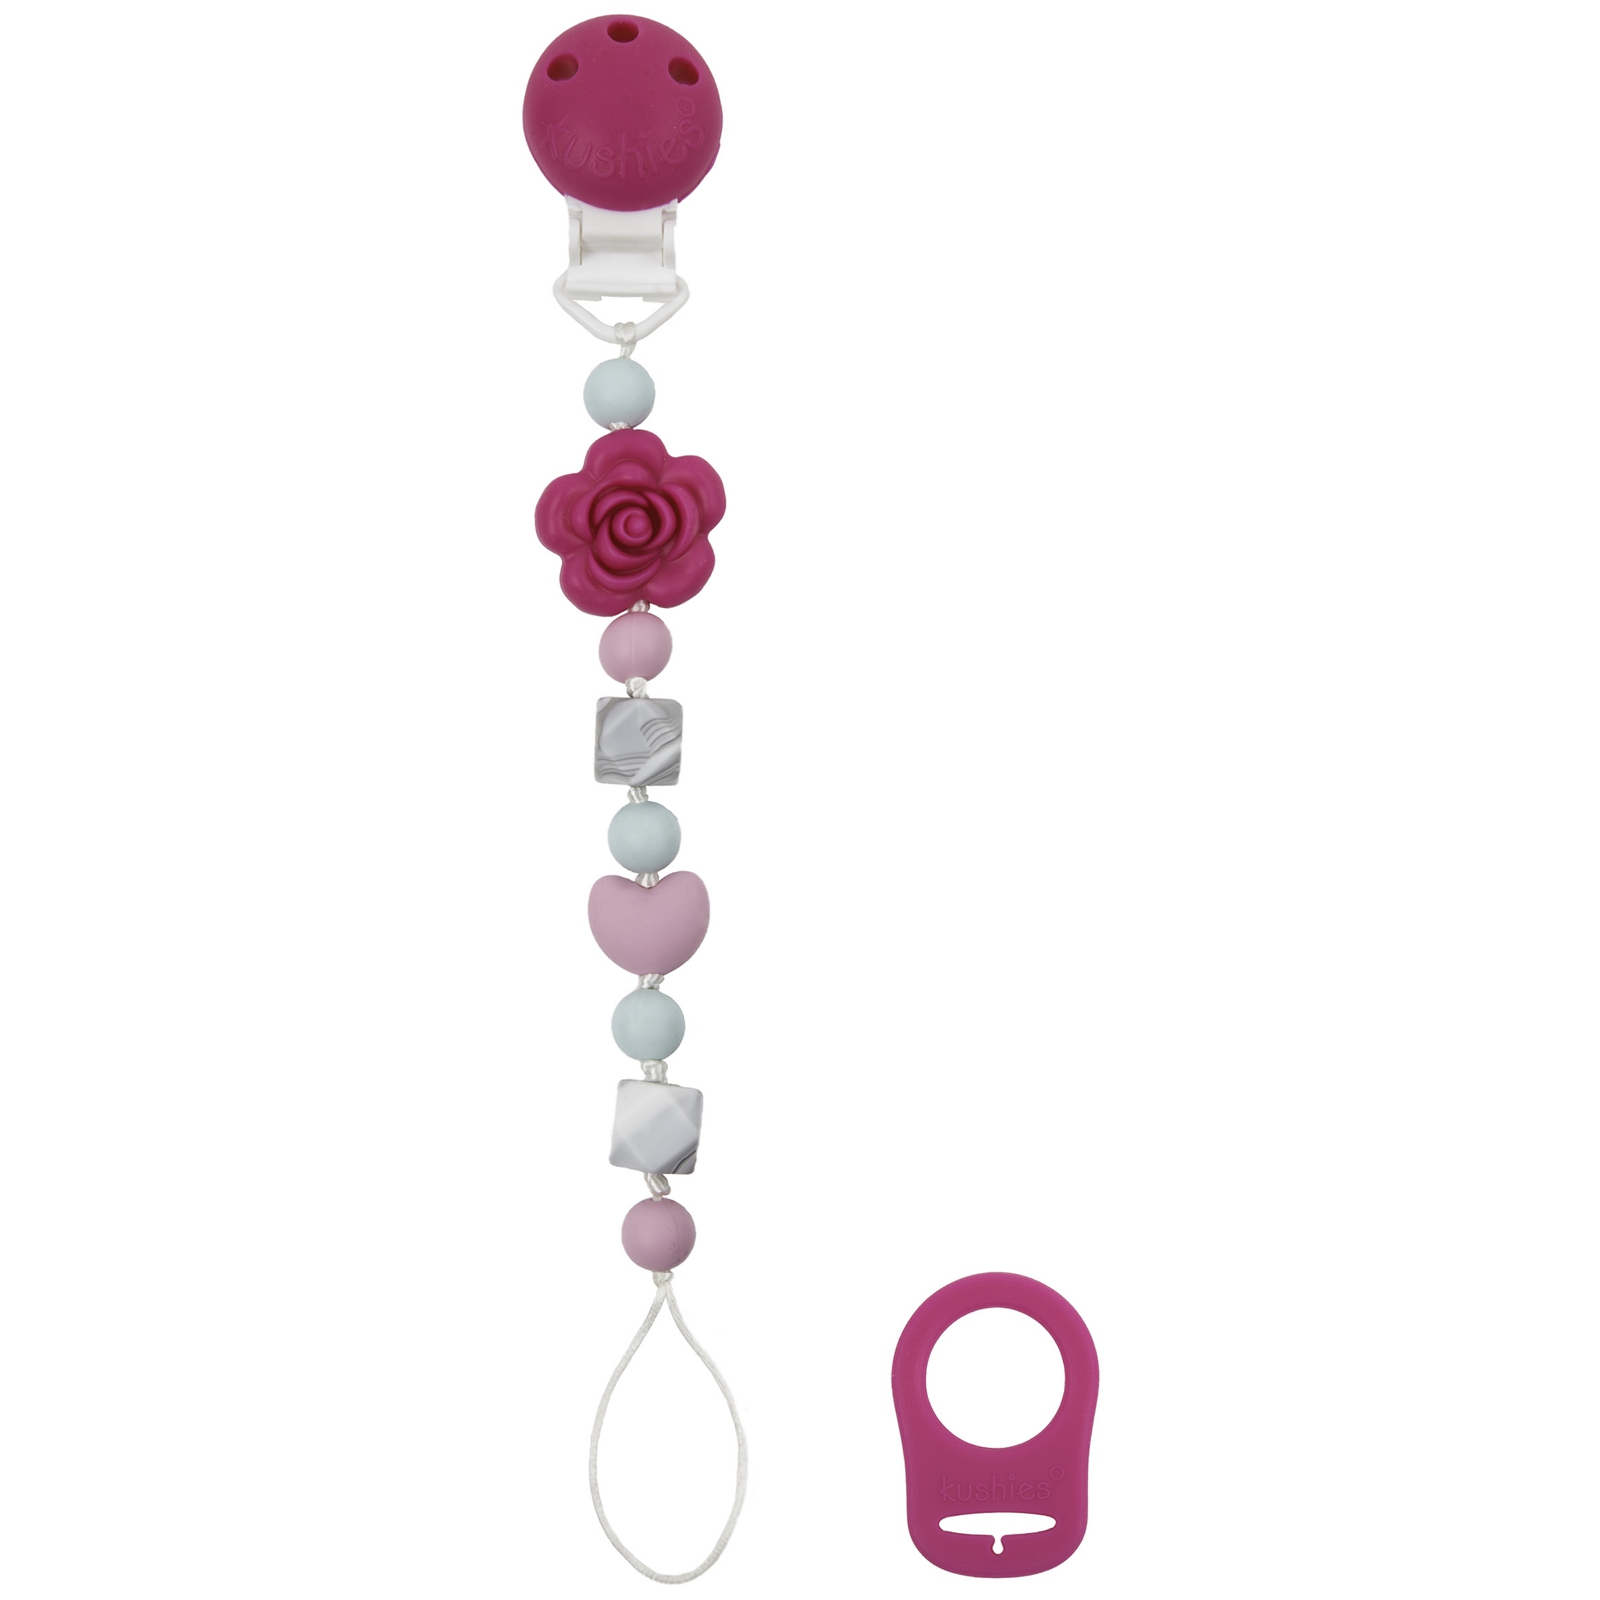 KUSHIES Attache-sucette en silicone SiliBeads, rose rose vif